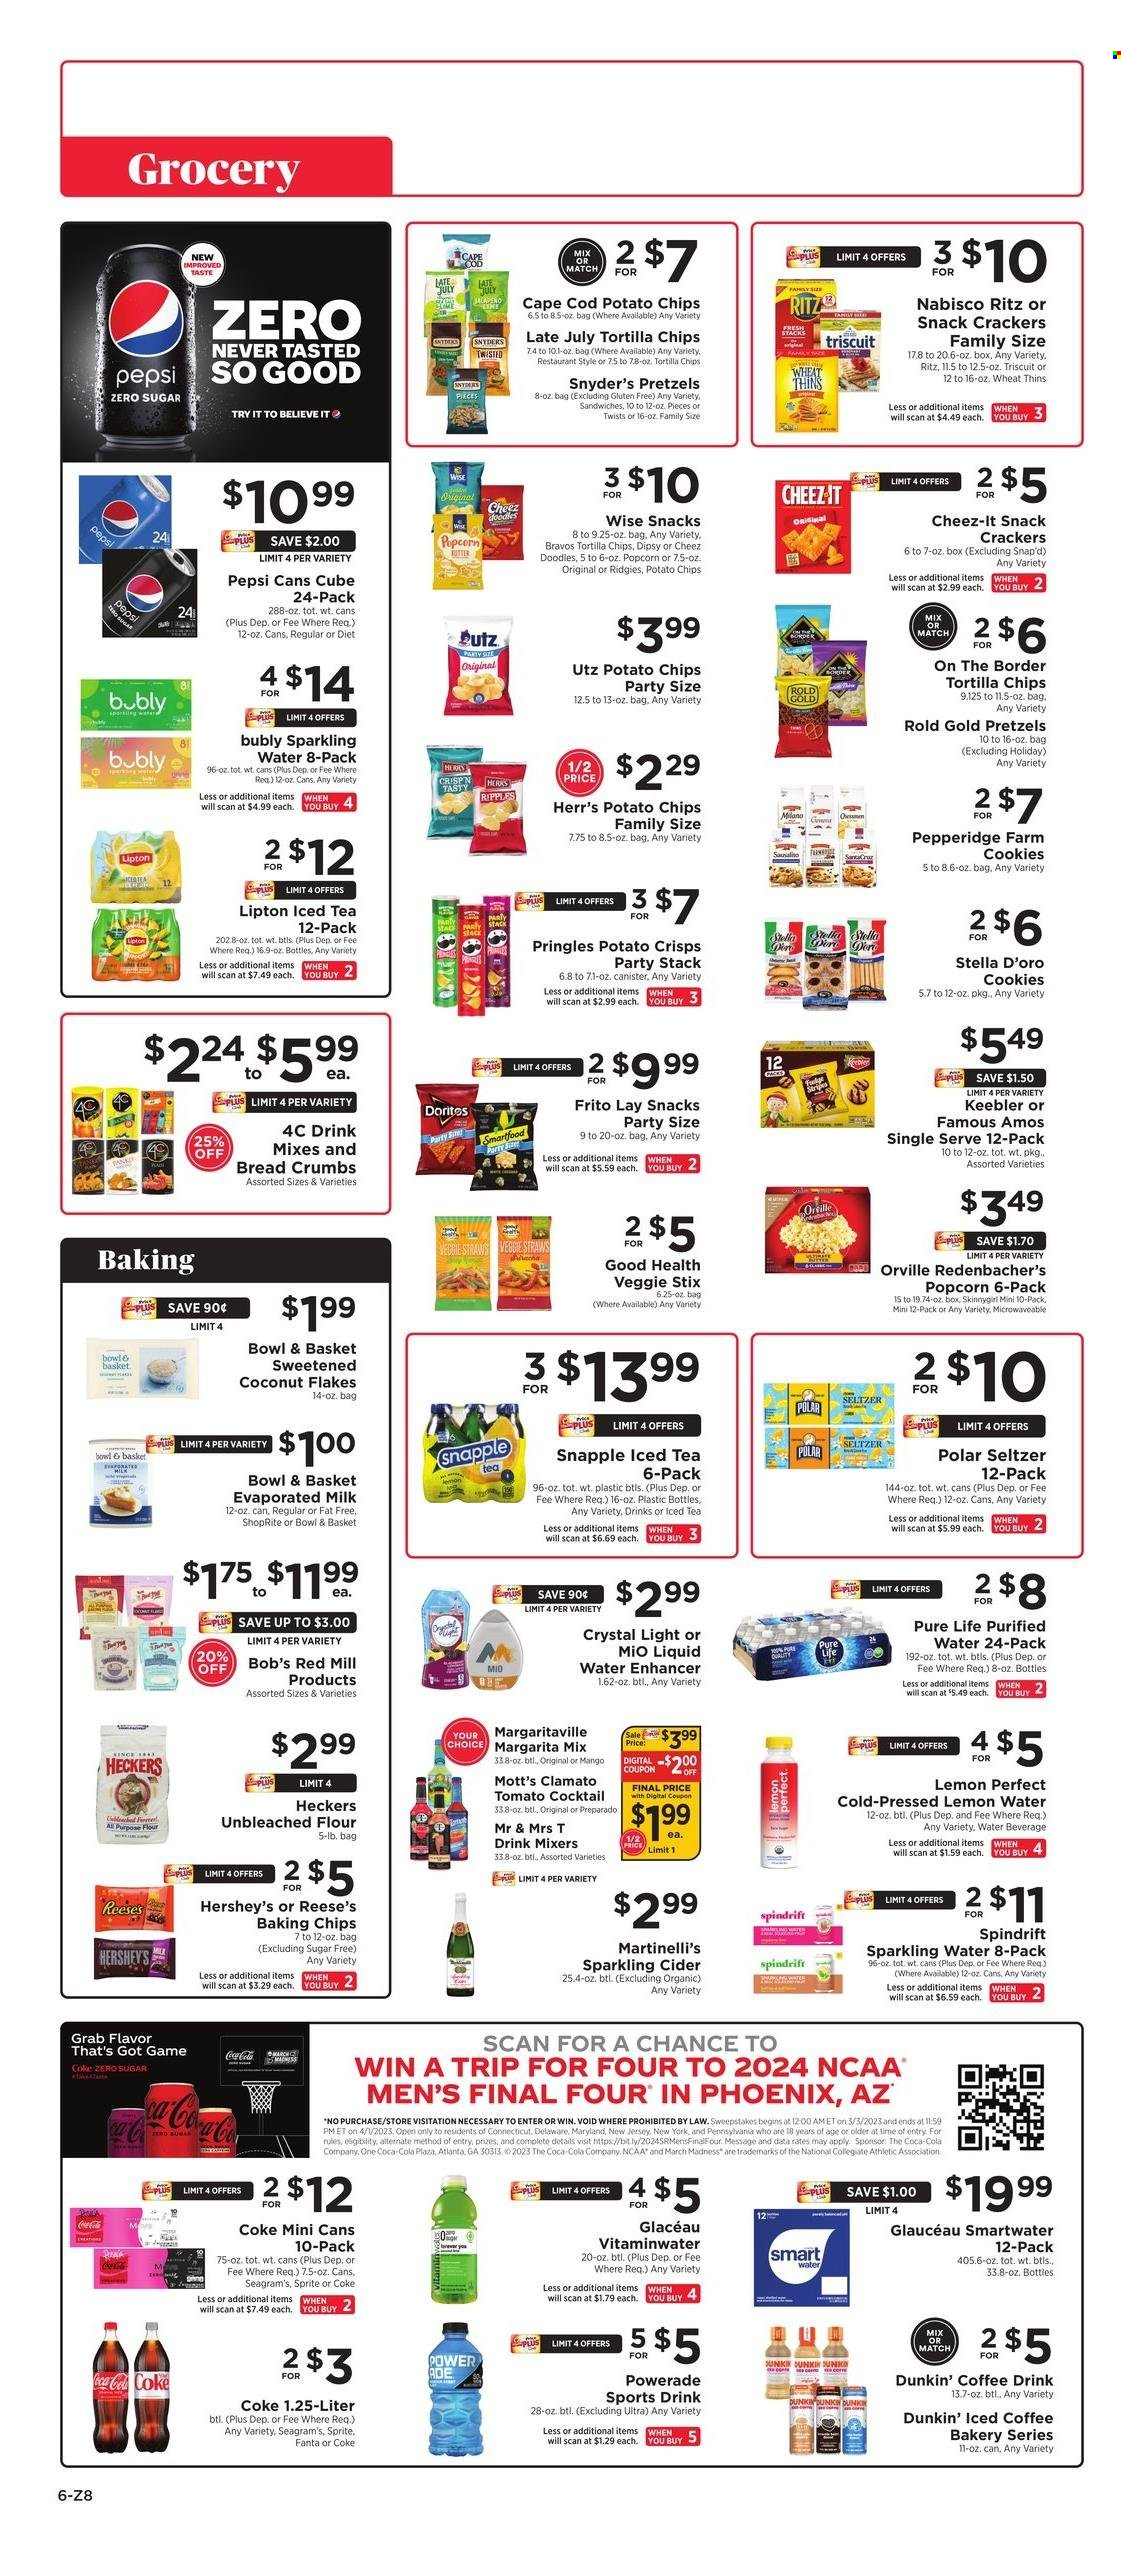 thumbnail - ShopRite Flyer - 03/24/2023 - 03/30/2023 - Sales products - pretzels, Bowl & Basket, breadcrumbs, Mott's, cod, sandwich, evaporated milk, Reese's, Hershey's, cookies, crackers, Keebler, RITZ, tortilla chips, potato crisps, potato chips, Pringles, Thins, popcorn, Cheez-It, all purpose flour, baking chips, flaked coconut, Coca-Cola, Sprite, Powerade, Pepsi, Fanta, Lipton, ice tea, Clamato, Coca-Cola zero, Snapple, Spindrift, Coke, seltzer water, sparkling water, purified water, Smartwater, water, Margarita Mix, iced coffee, sparkling cider, sparkling wine, cider, Paws. Page 6.